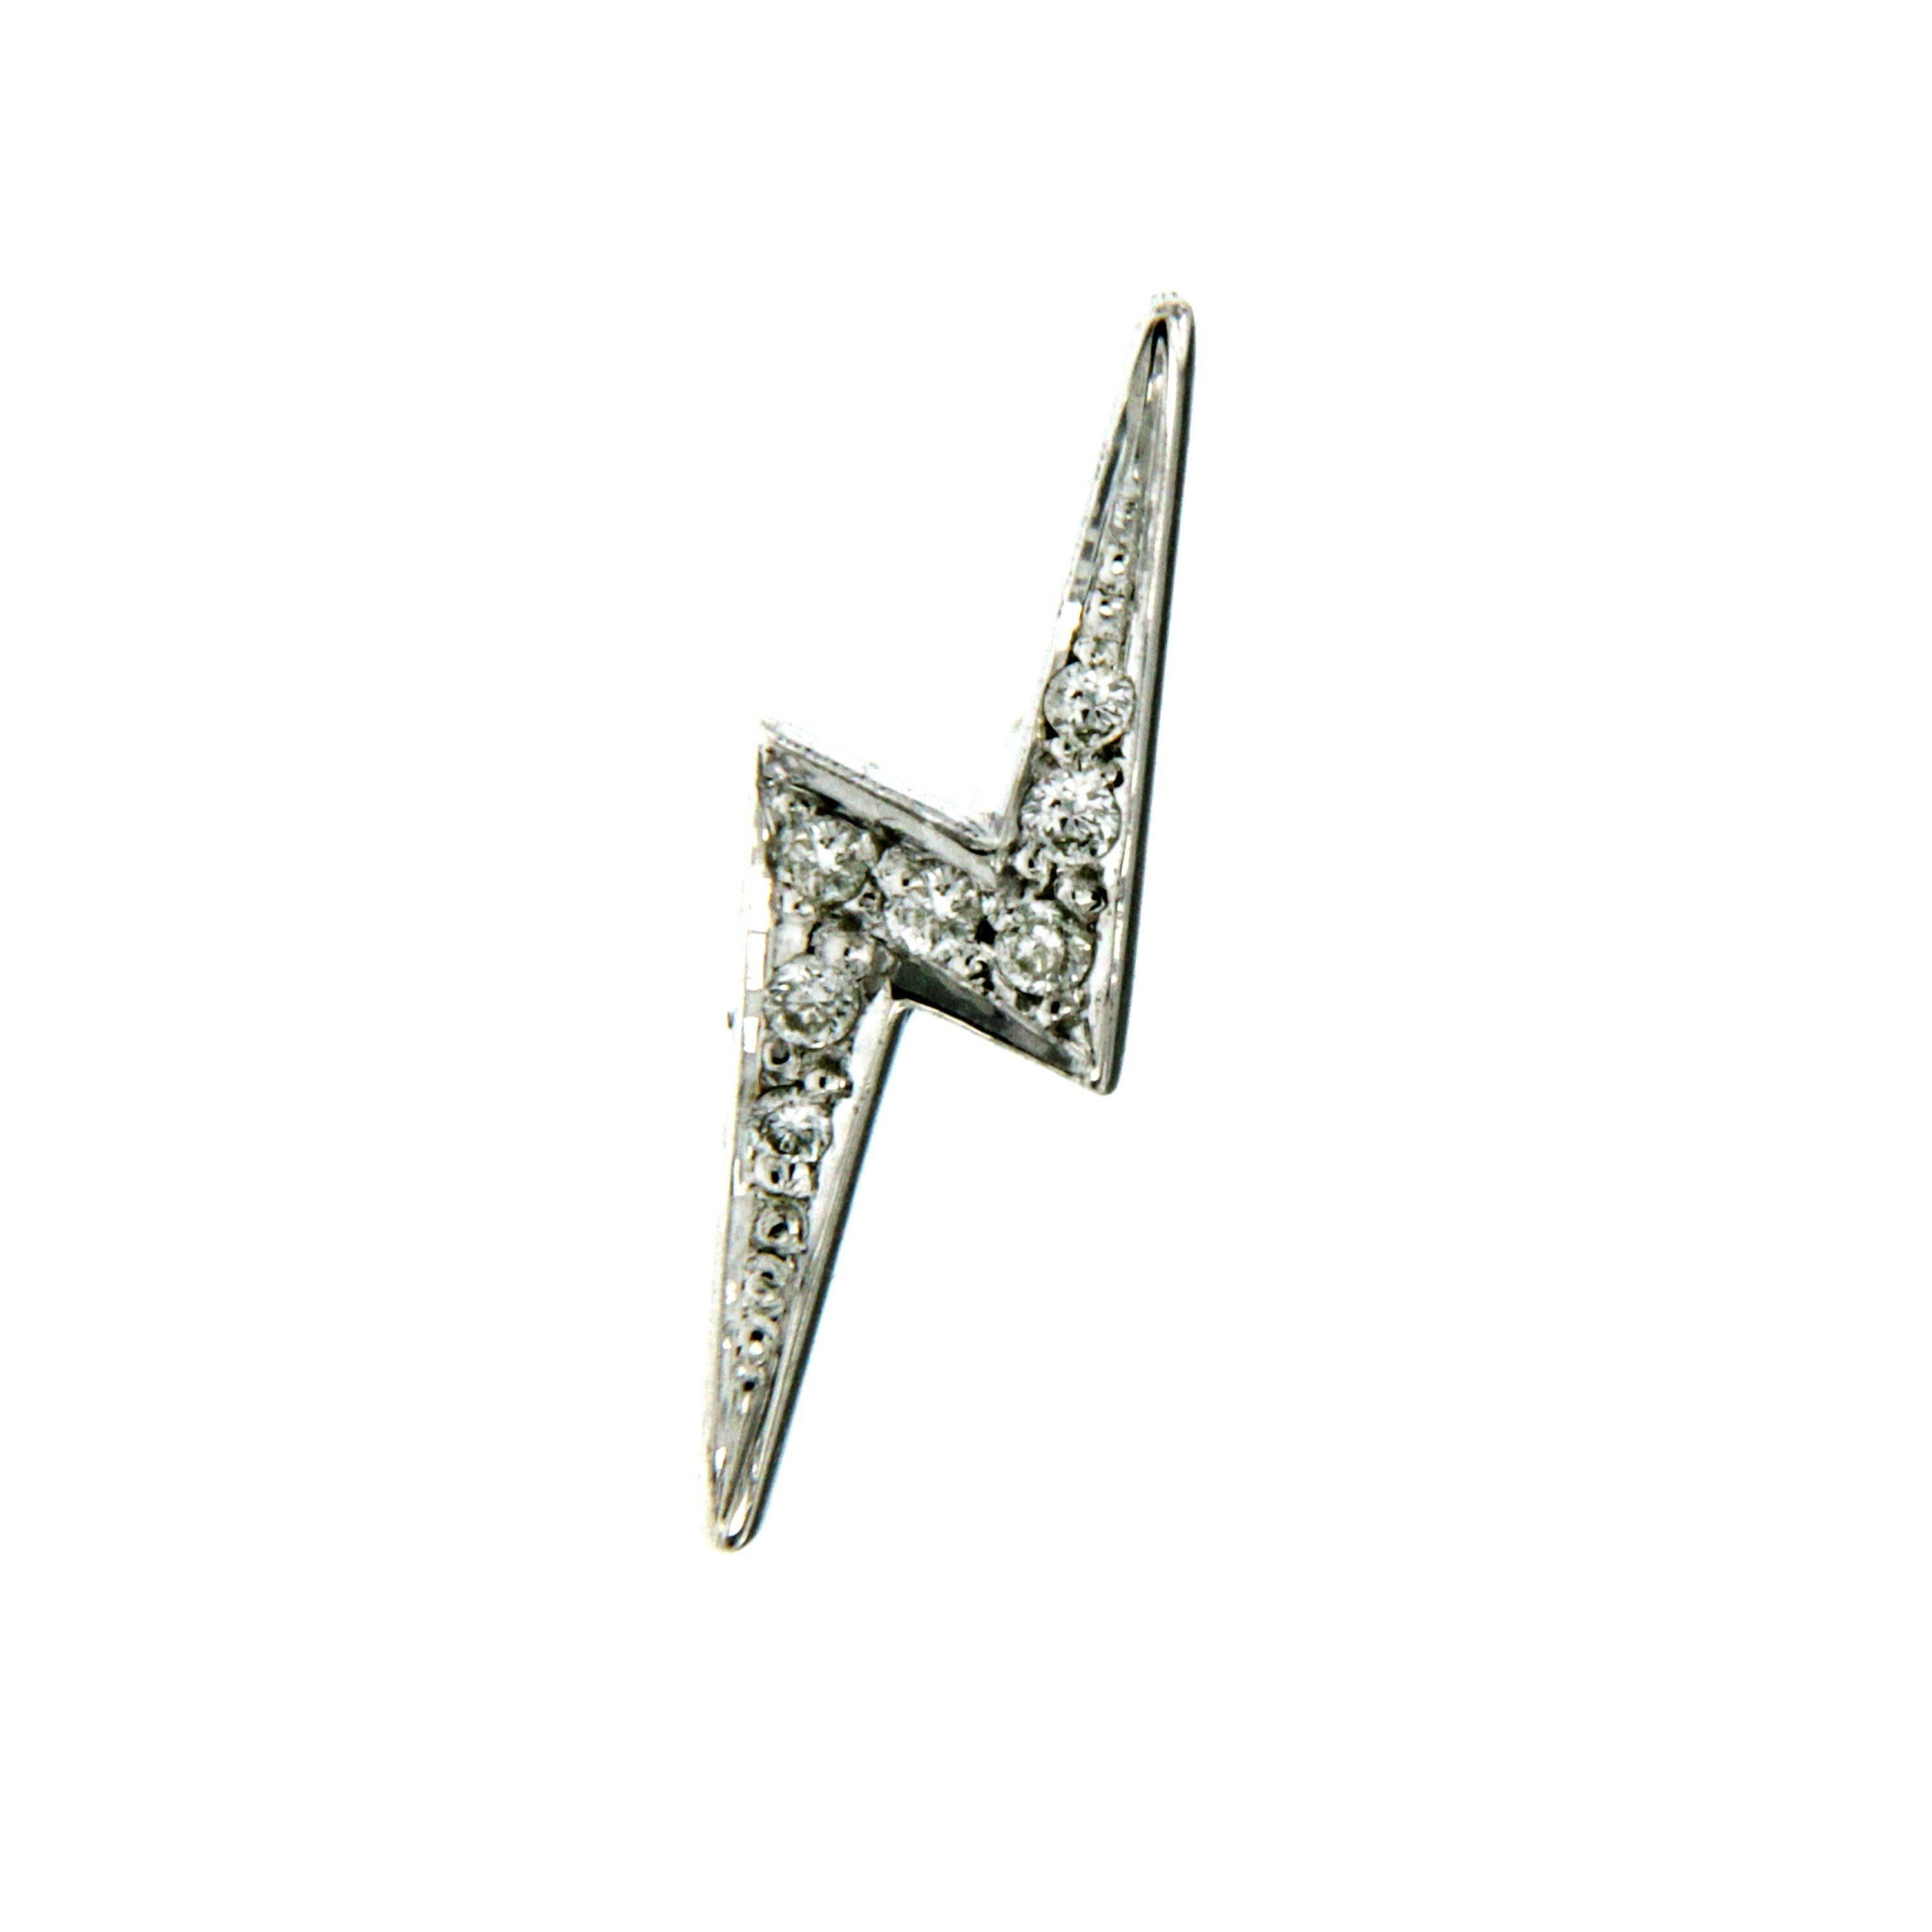 This gorgeous 'Lightning Bolt' earring it's crafted from 18k white gold and encrusted with 0.05 cts of sparkling diamonds. Wear your alone or stacked with other styles.
Includes a ball flower threaded backing in a matching color of 18k gold. 
Sold